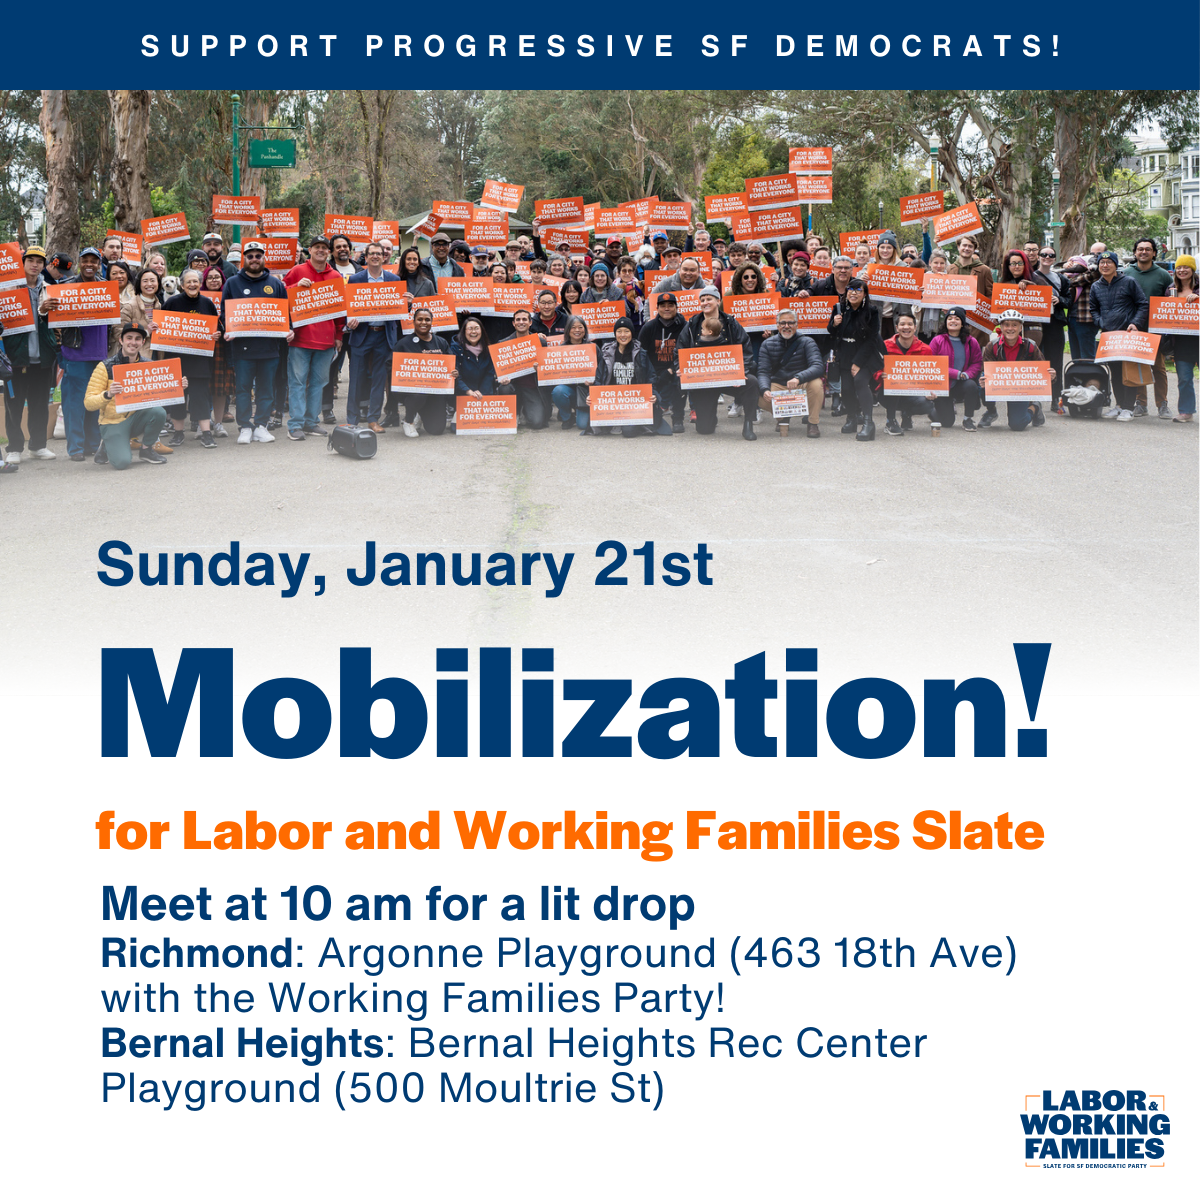 Labor & Working Families SFDCCC Slate Mobilization @ Sunday, January 21 | 10am Argonne Playground | 463 18th Ave